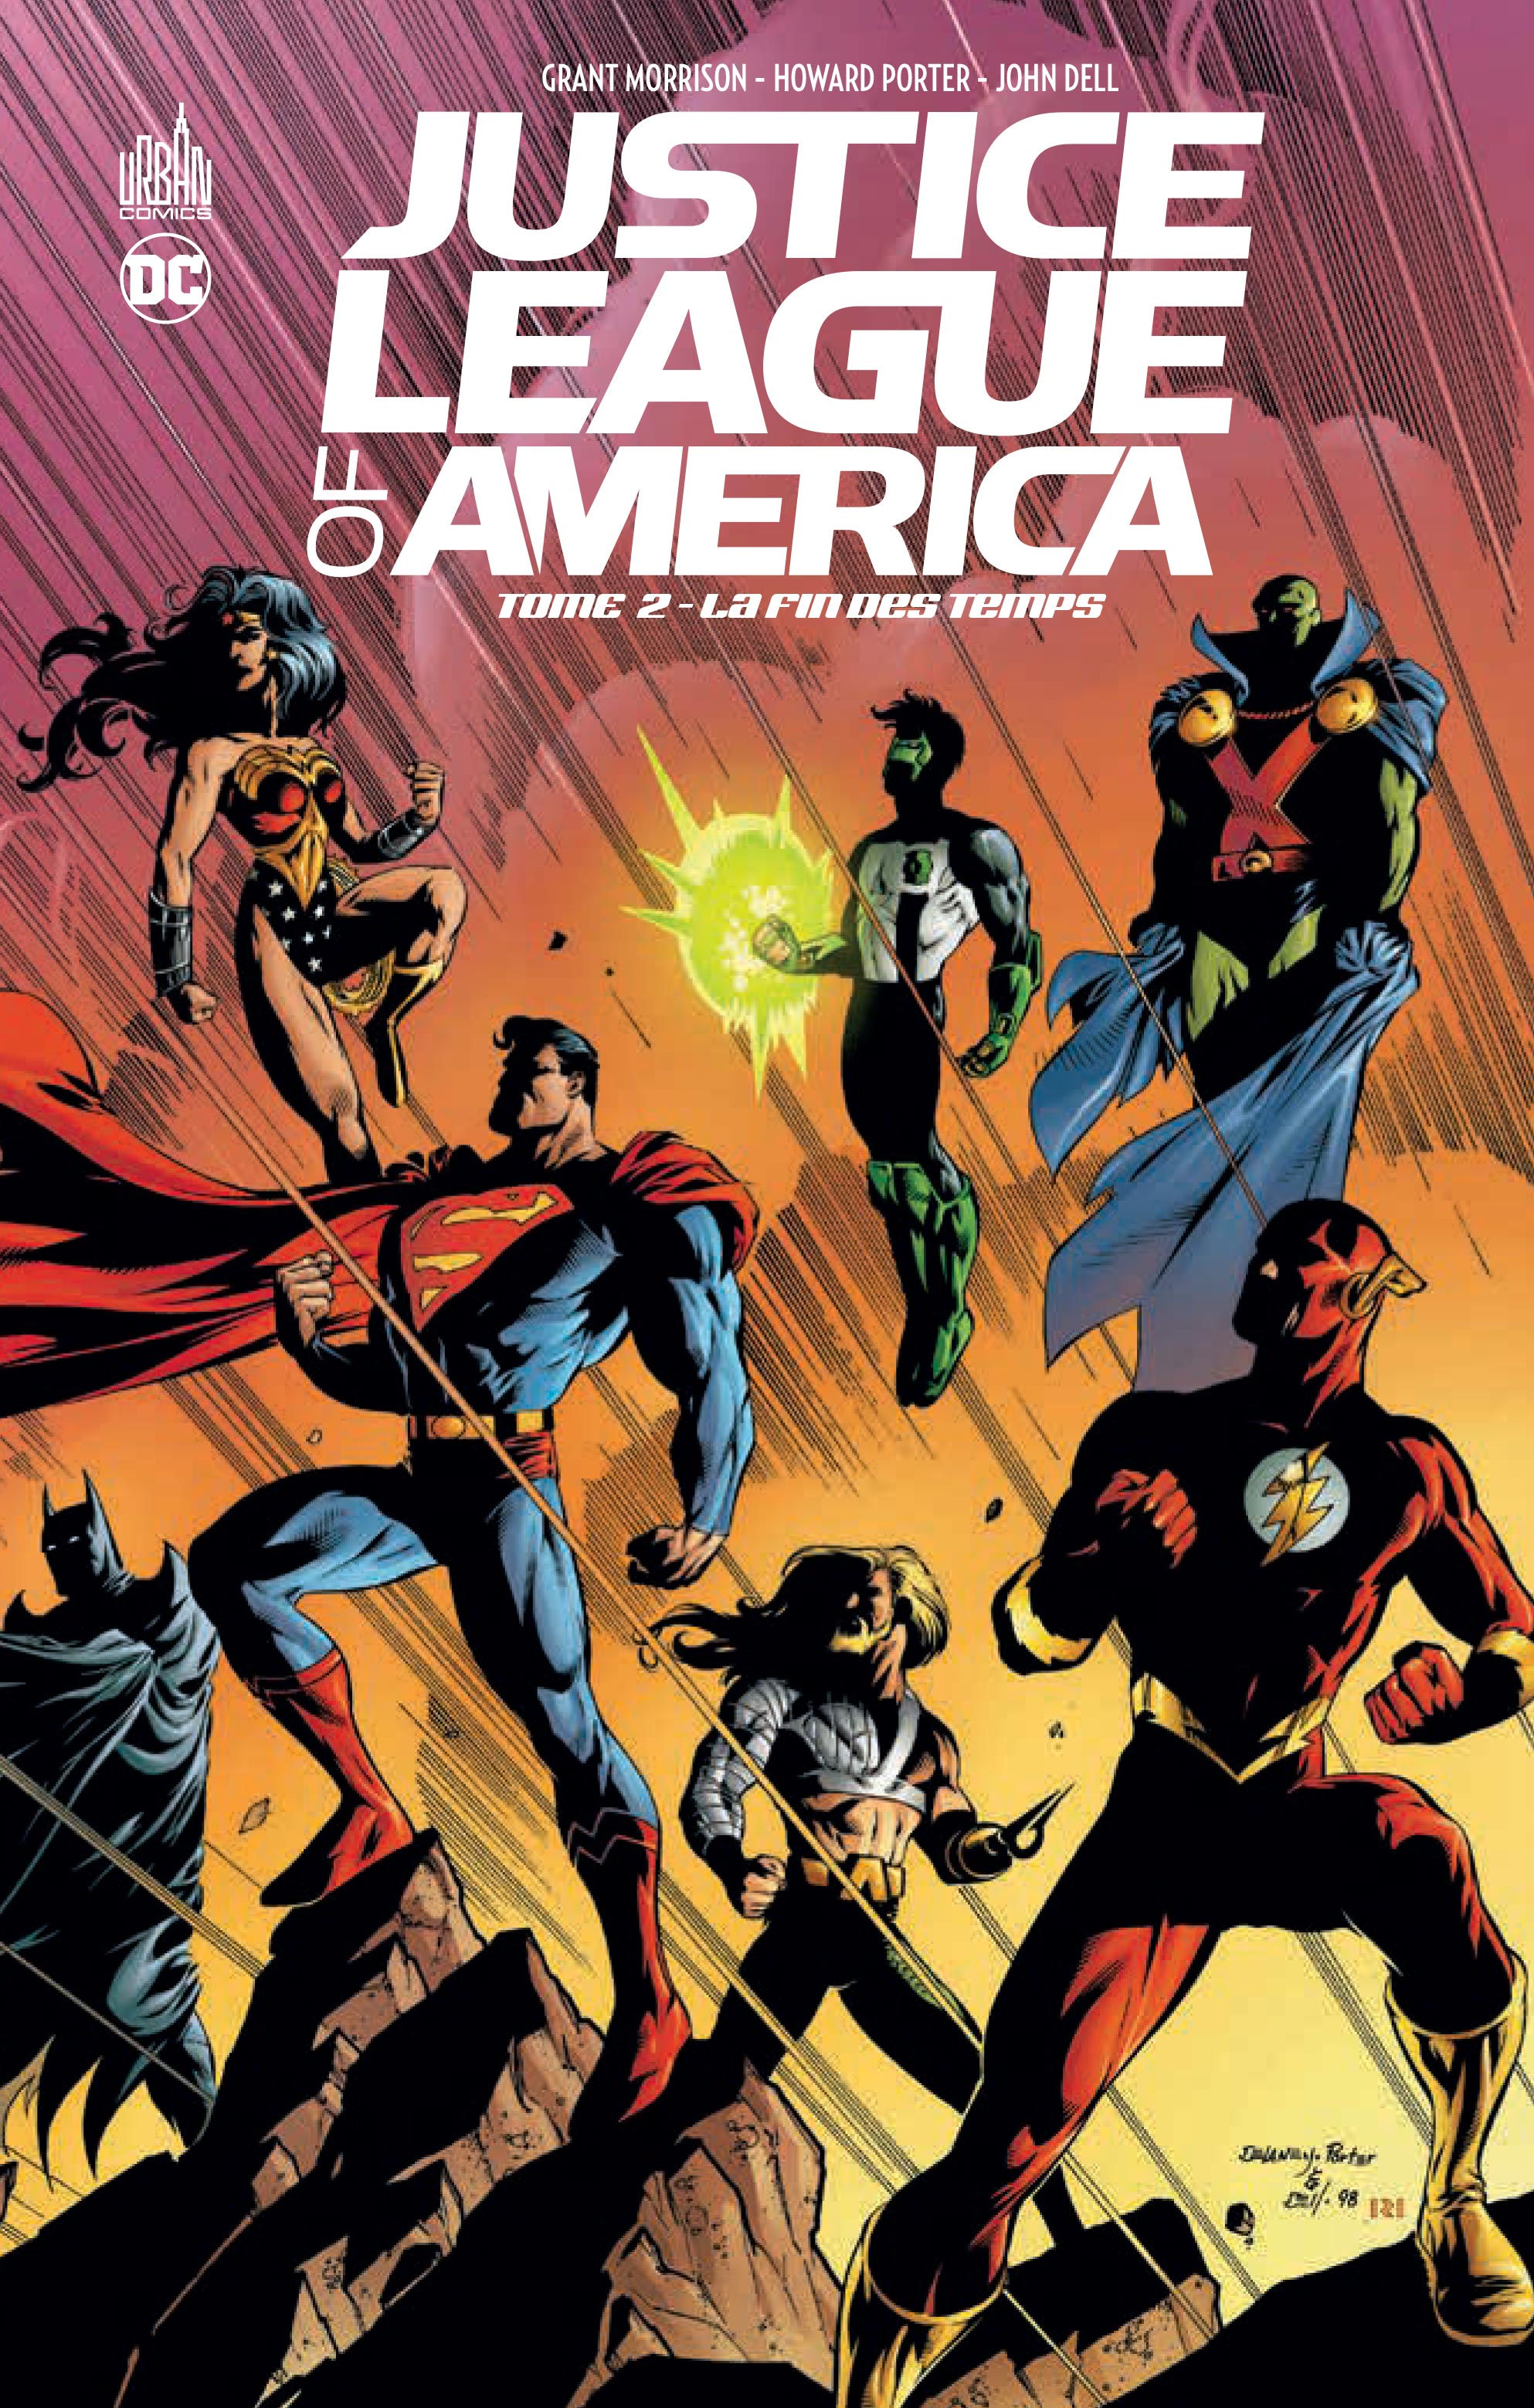 JUSTICE LEAGUE OF AMERICA – Tome 2 - couv